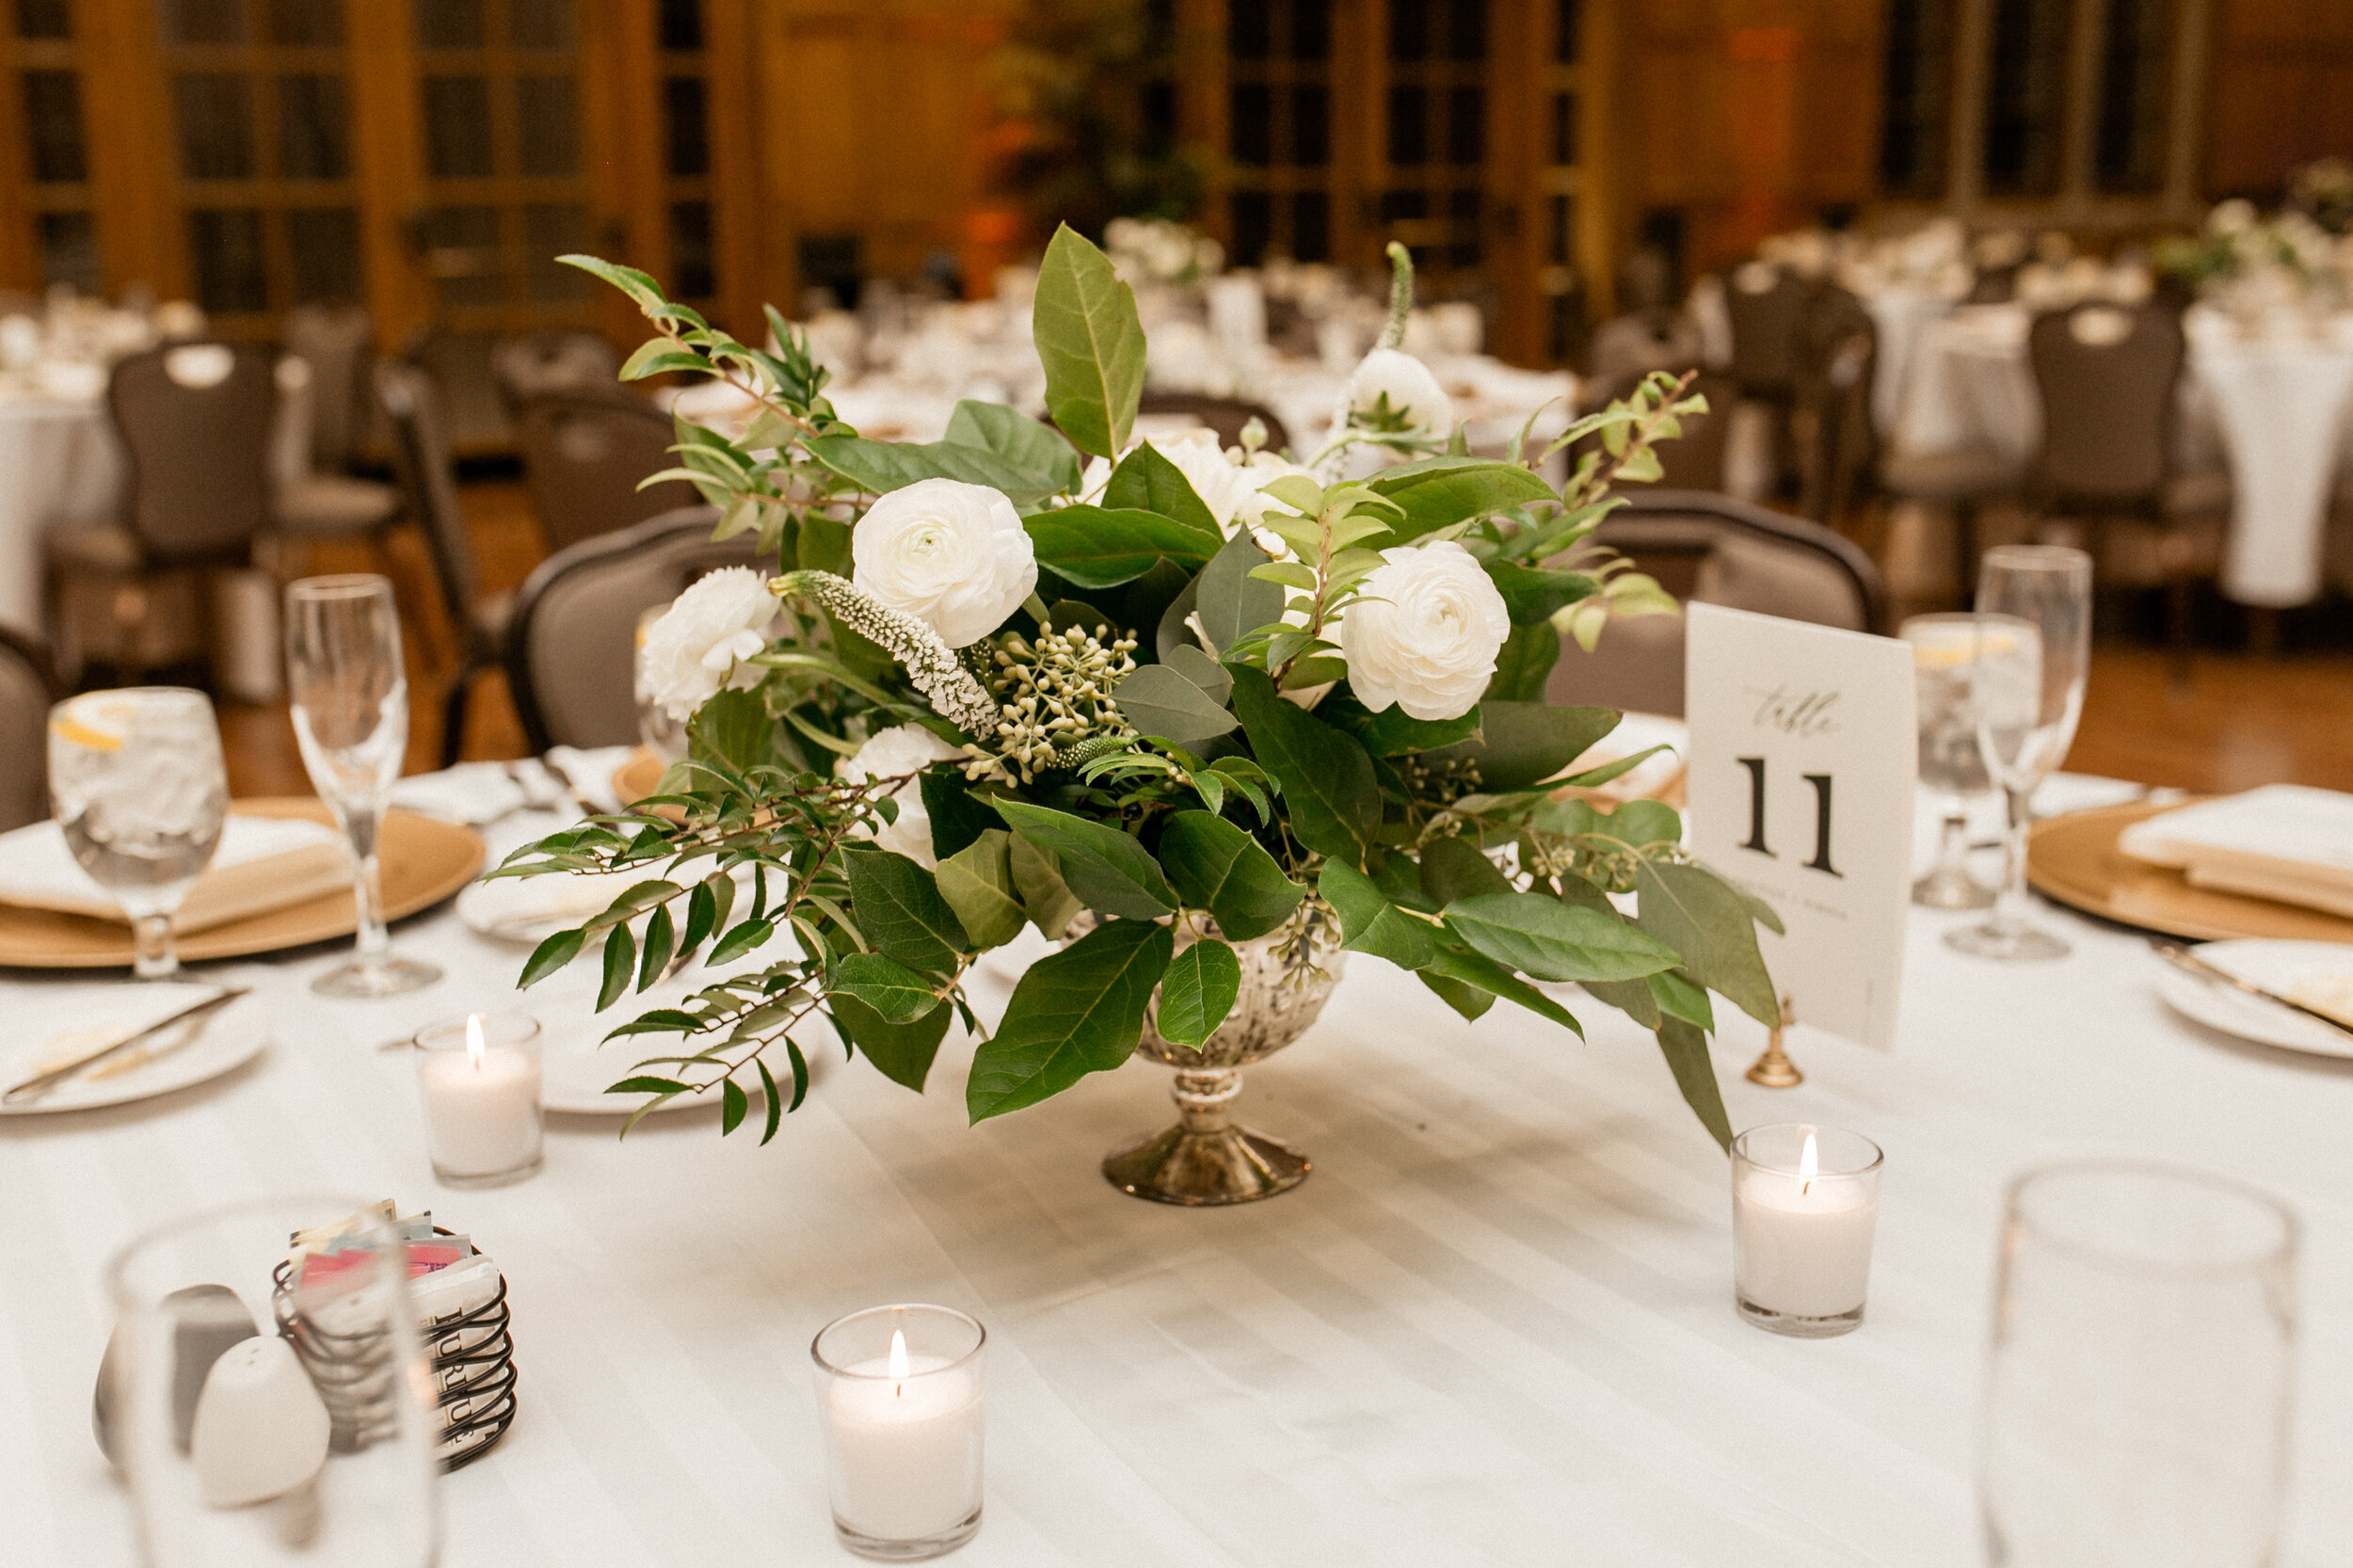 white flowers with greenery compote centerpiece.jpg